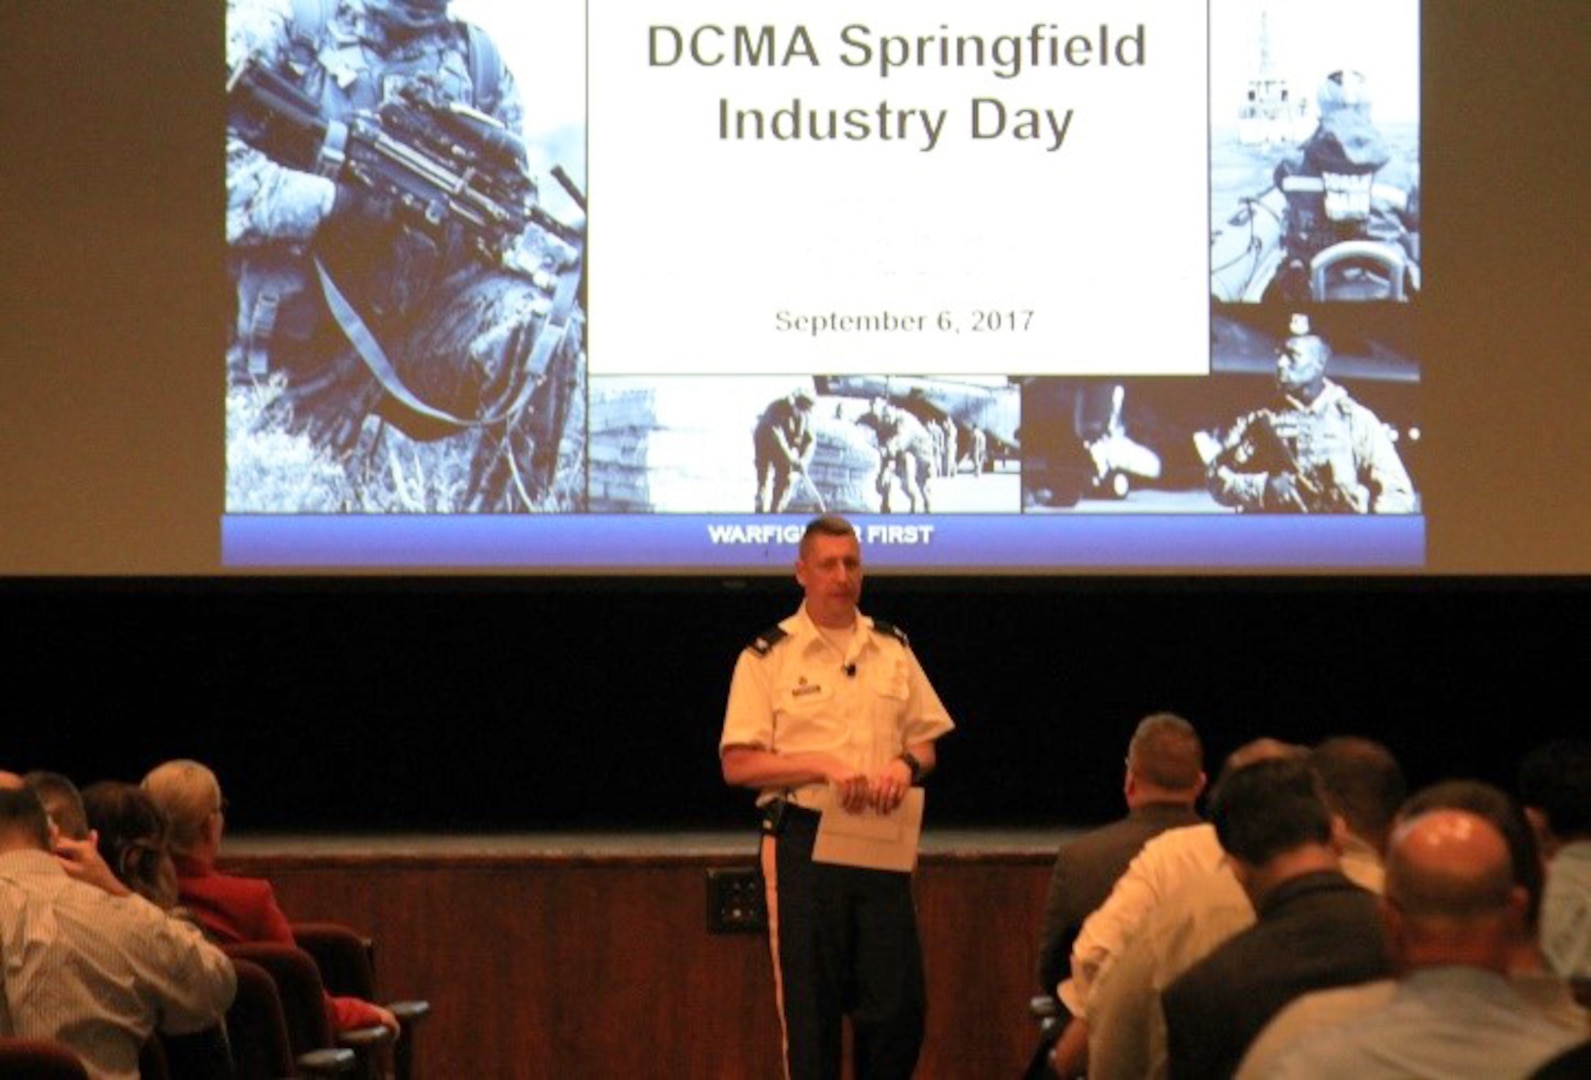 Defense Contract Management Agency Springfield held its first industry day for government contractors on Sept. 6. DCMA Springfield’s commander, Army Col. Jay Ferreira, and staff provided briefings to approximately 120 contractors during the event. (DCMA photo by Lorraine Baker)